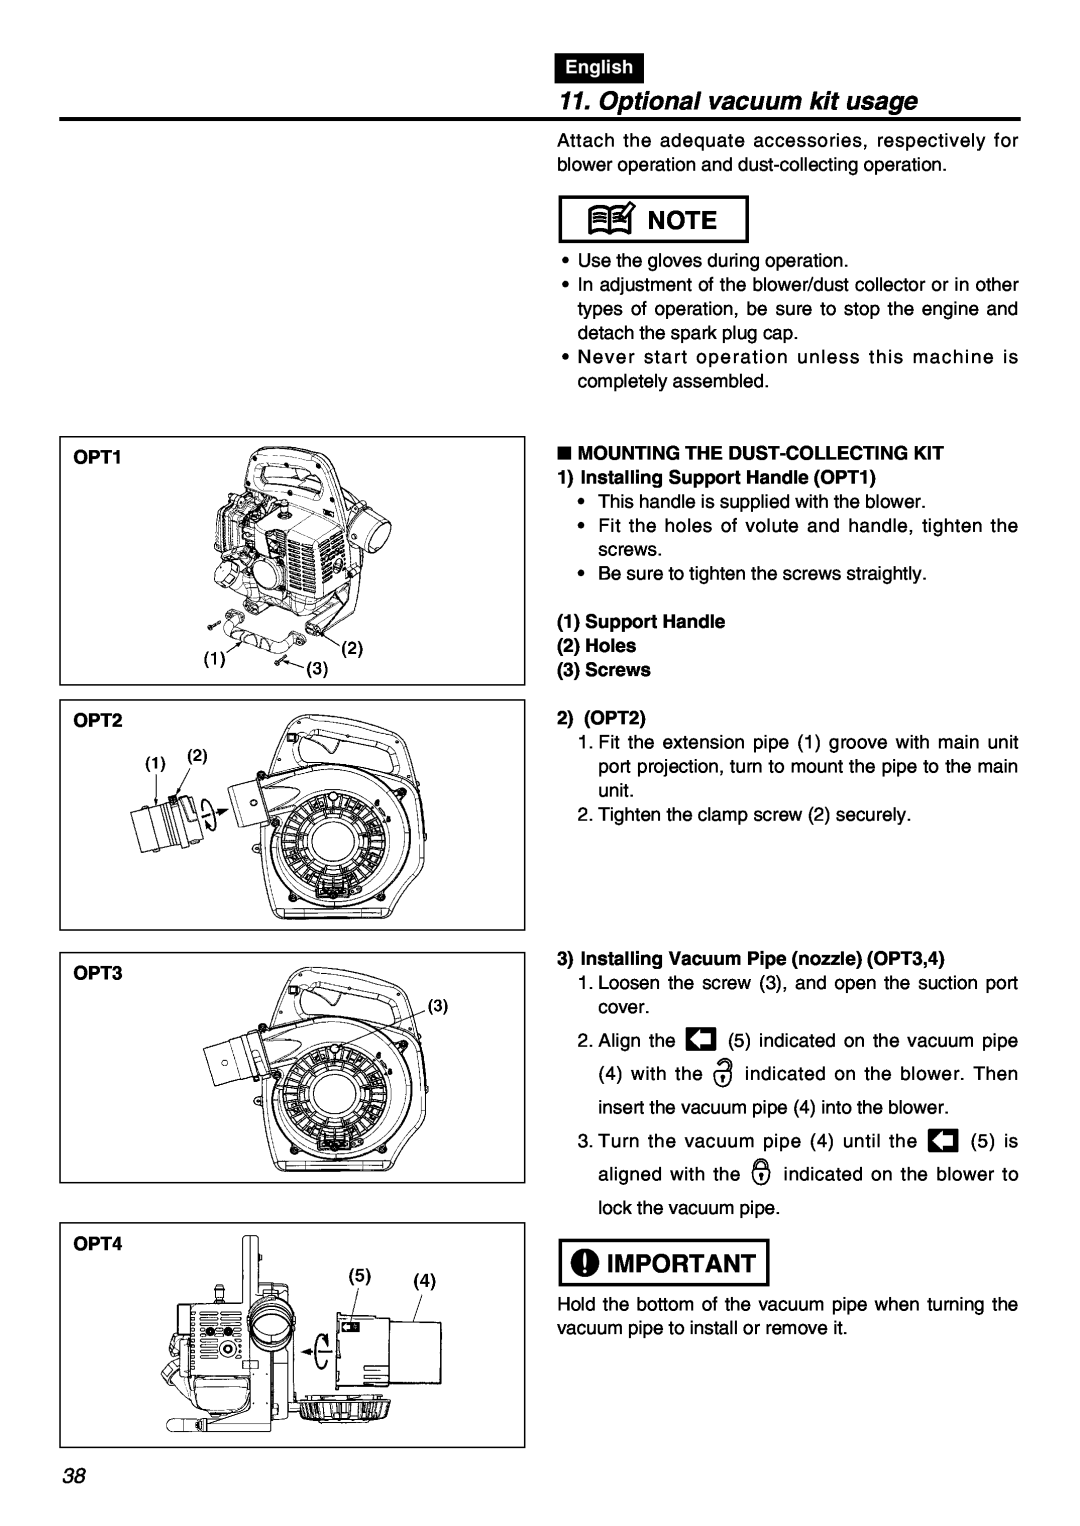 RedMax HBZ2601 manual Optional vacuum kit usage, OPT1 OPT2 OPT3 OPT4, English, Mounting The Dust-Collectingkit 